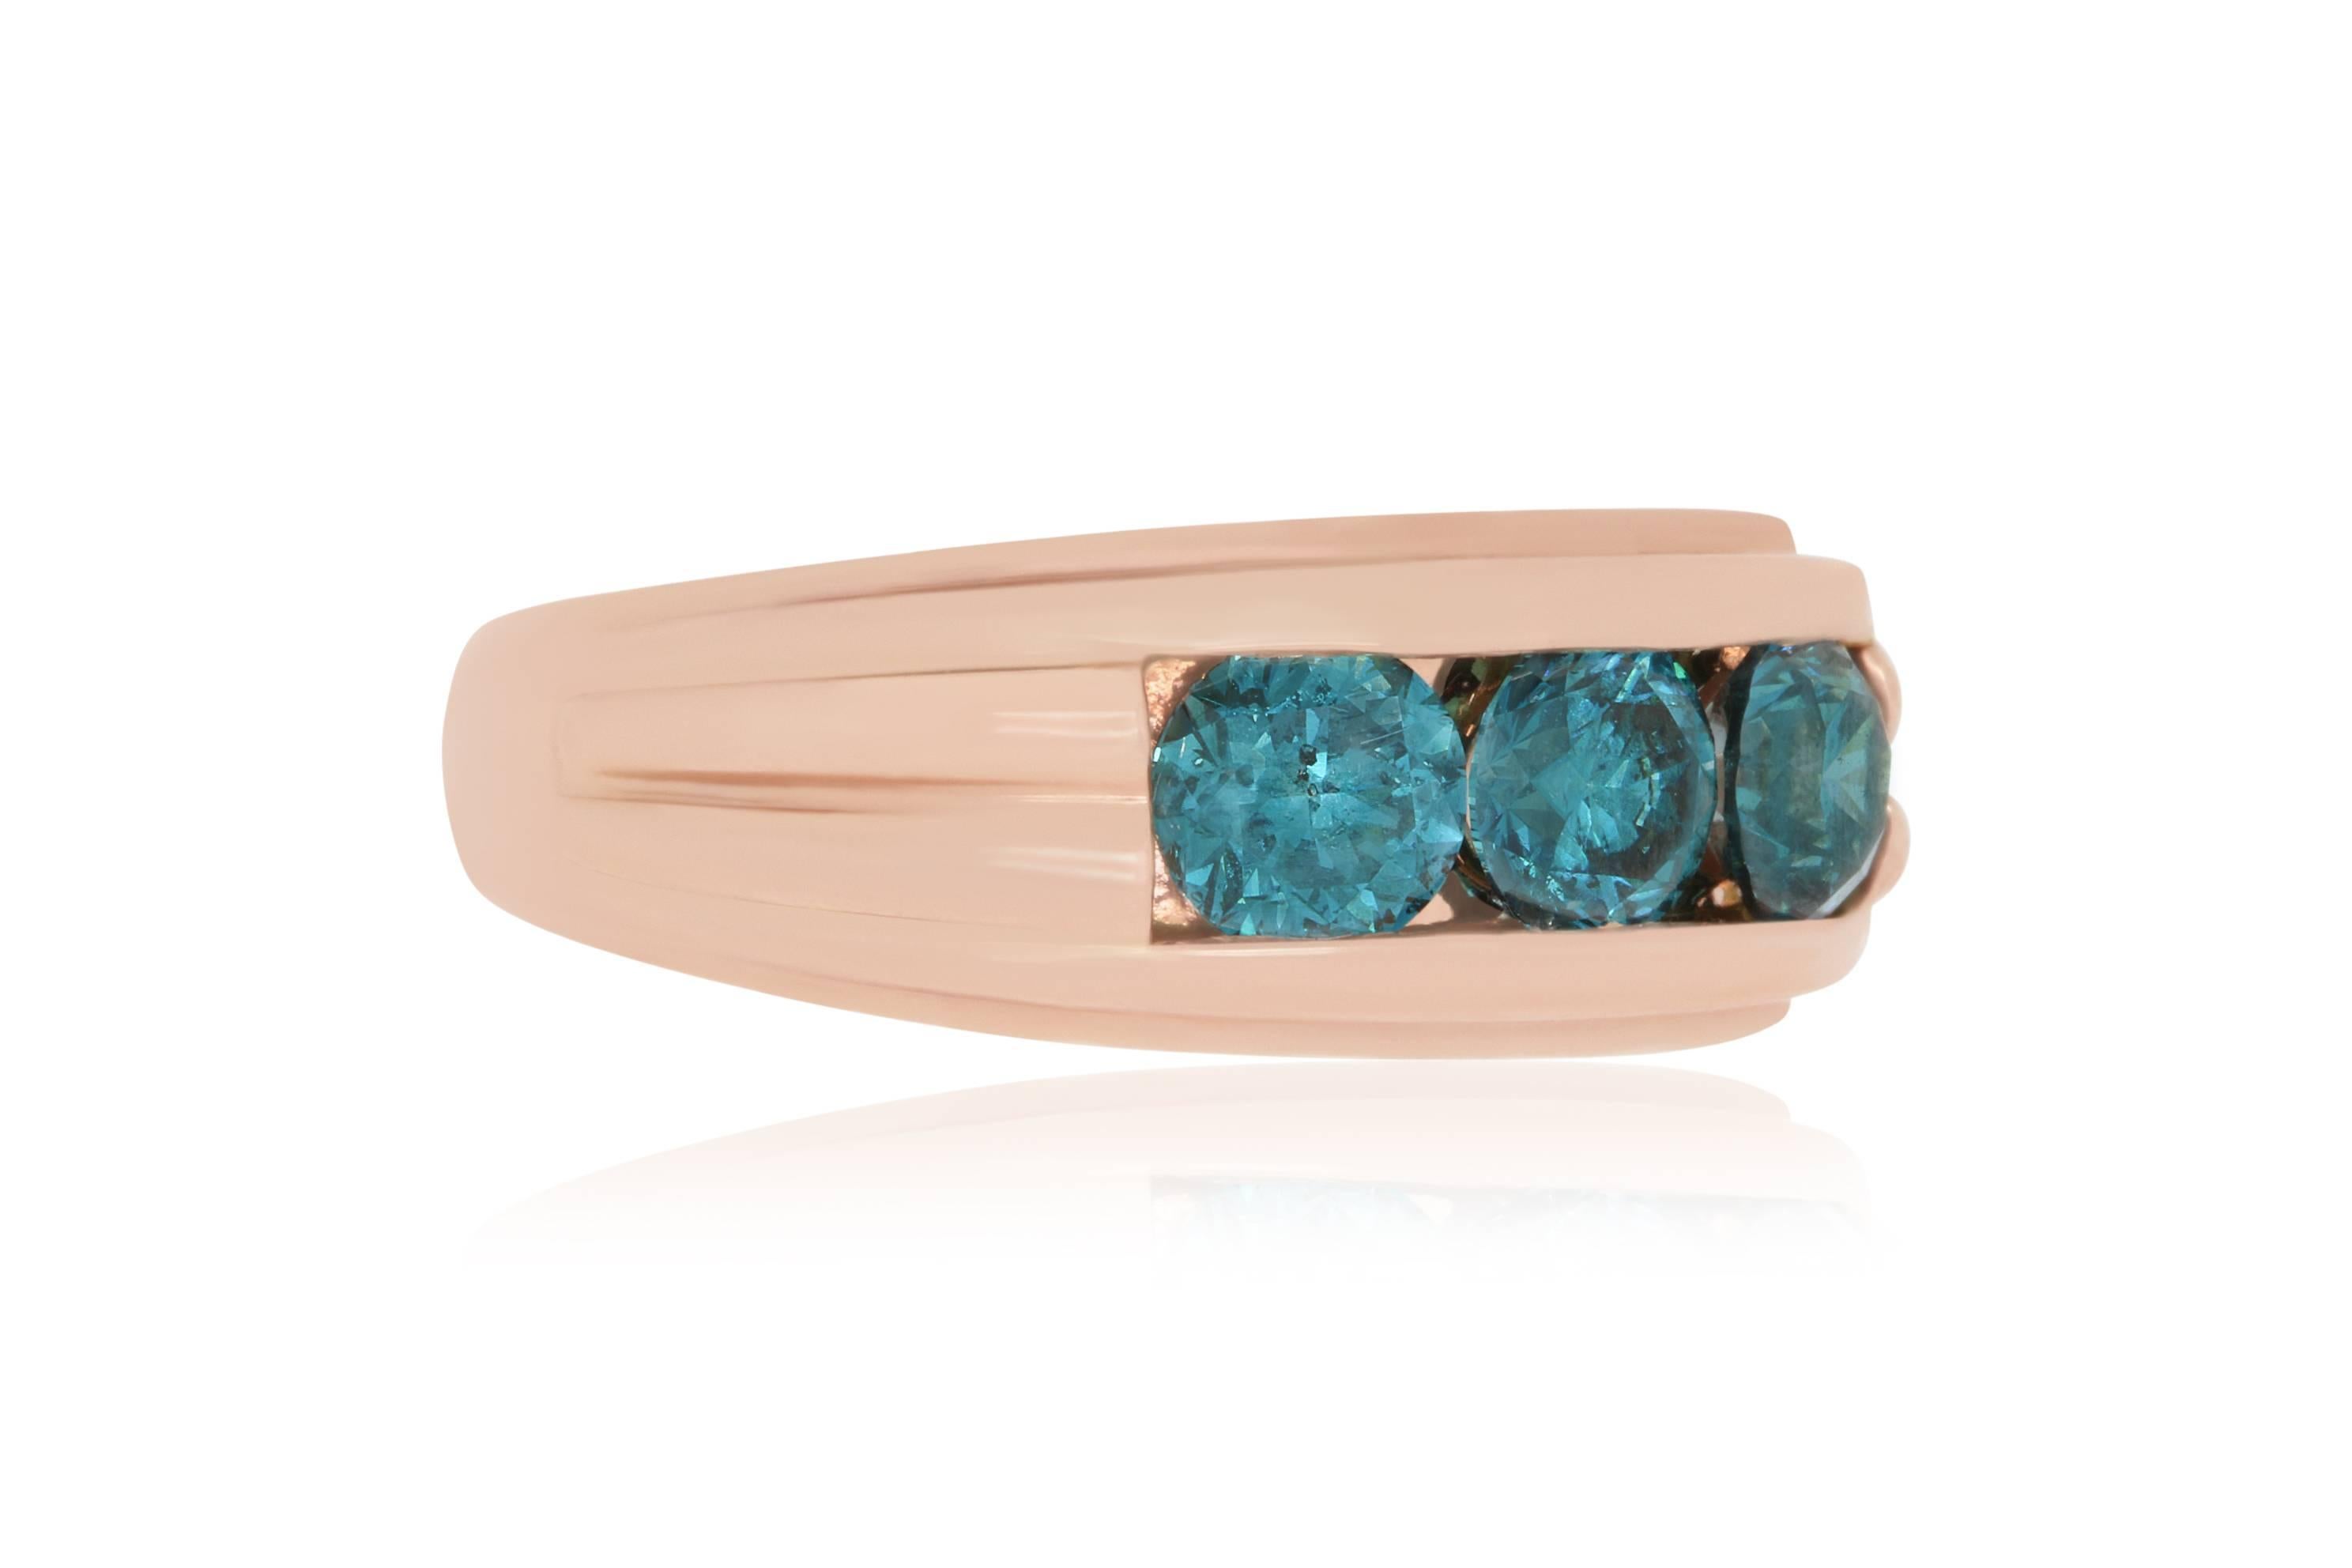 This band is a simple stunner.  A single row of 3 massive and stunning Blue Diamonds line the top of the band.  The Blue Diamonds really pop on the Rose Gold colored band.  

Material: 14k Rose Gold
Colored Diamond:: 3 Round Blue Diamonds at 2.35